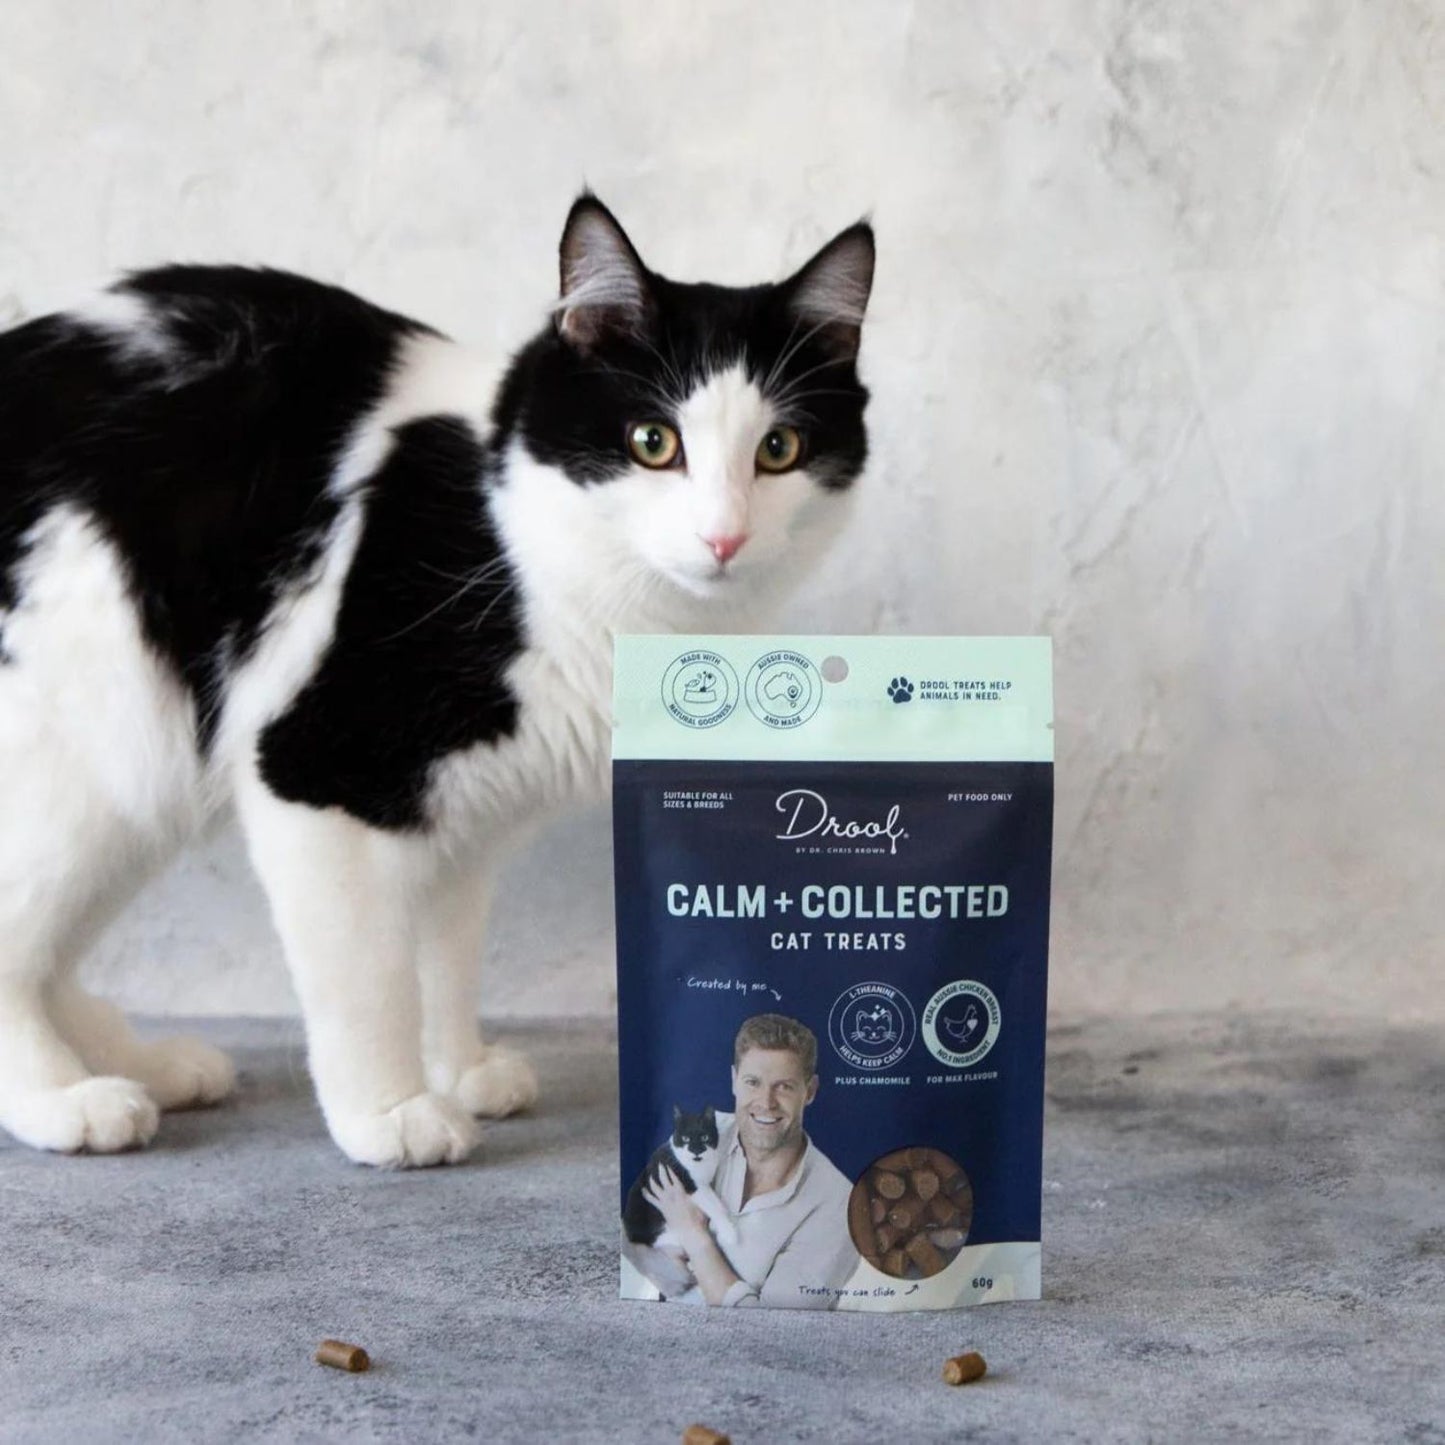 Calm + Collected Cat Treats